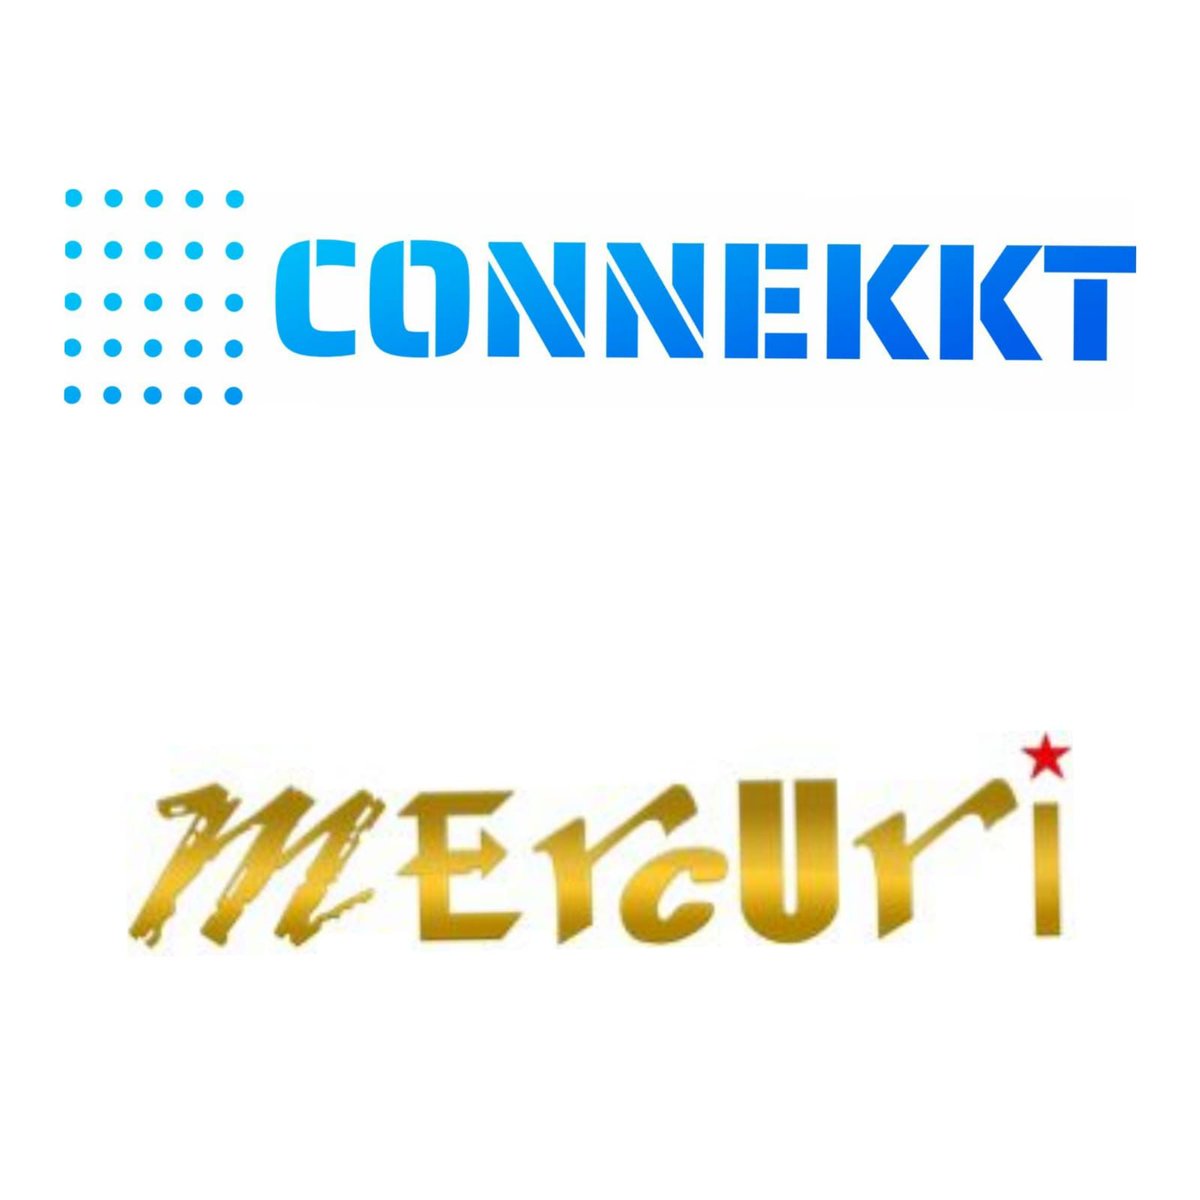 Big News : Connekkt Media and Mercuri Group forge Partnership for Multiple Mega-Budget South Films with an investment totaling Rs. 925 Crores starring Megastars in next three years. Connekkt Media will be the studio for the films and Connekkt Media and Mercuri Group will be